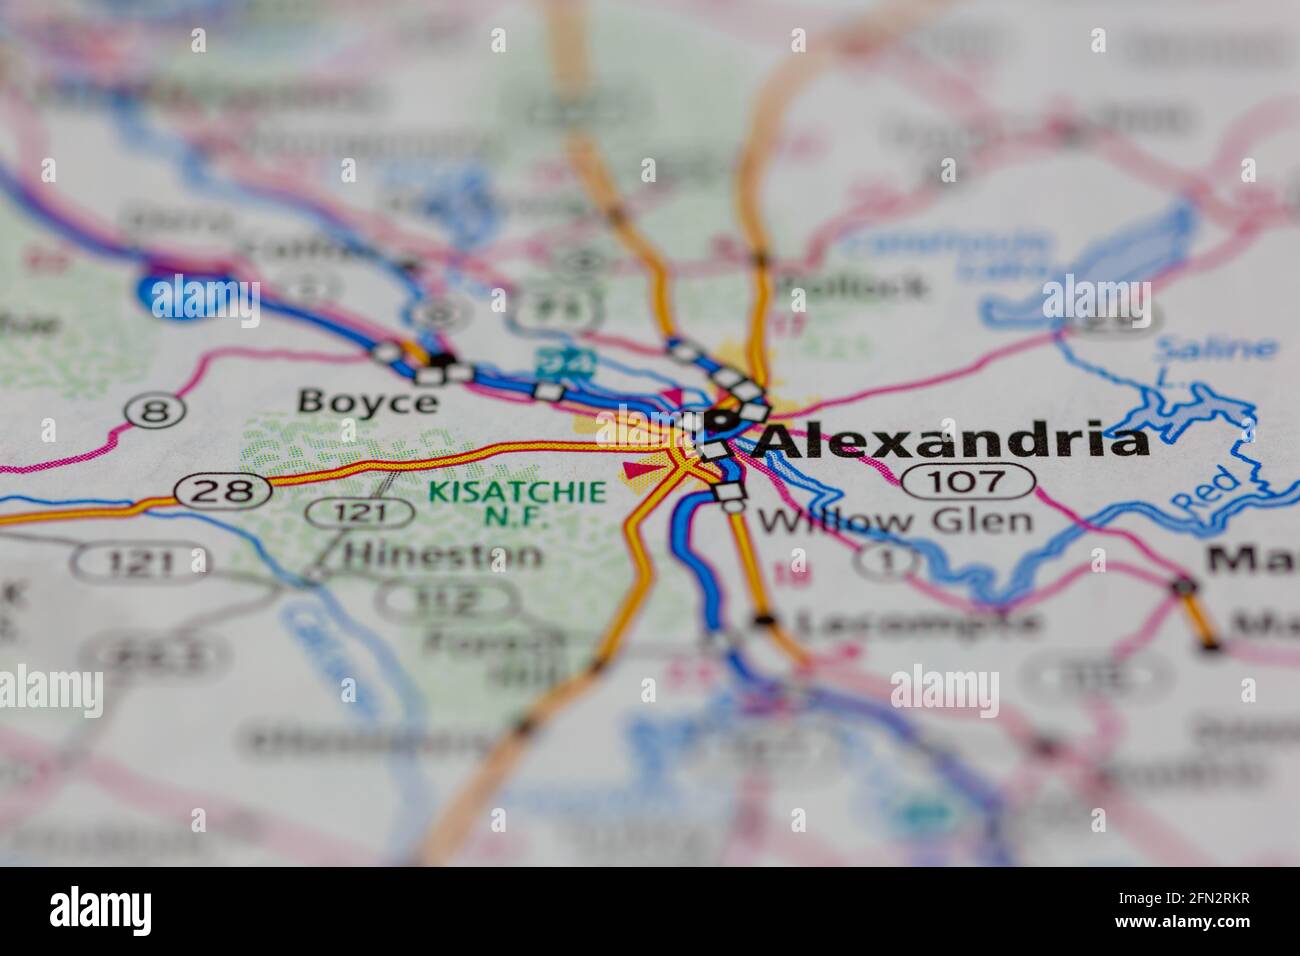 Alexandria Louisiana Usa Shown On A Geography Map Or Road Map 2FN2RKR 